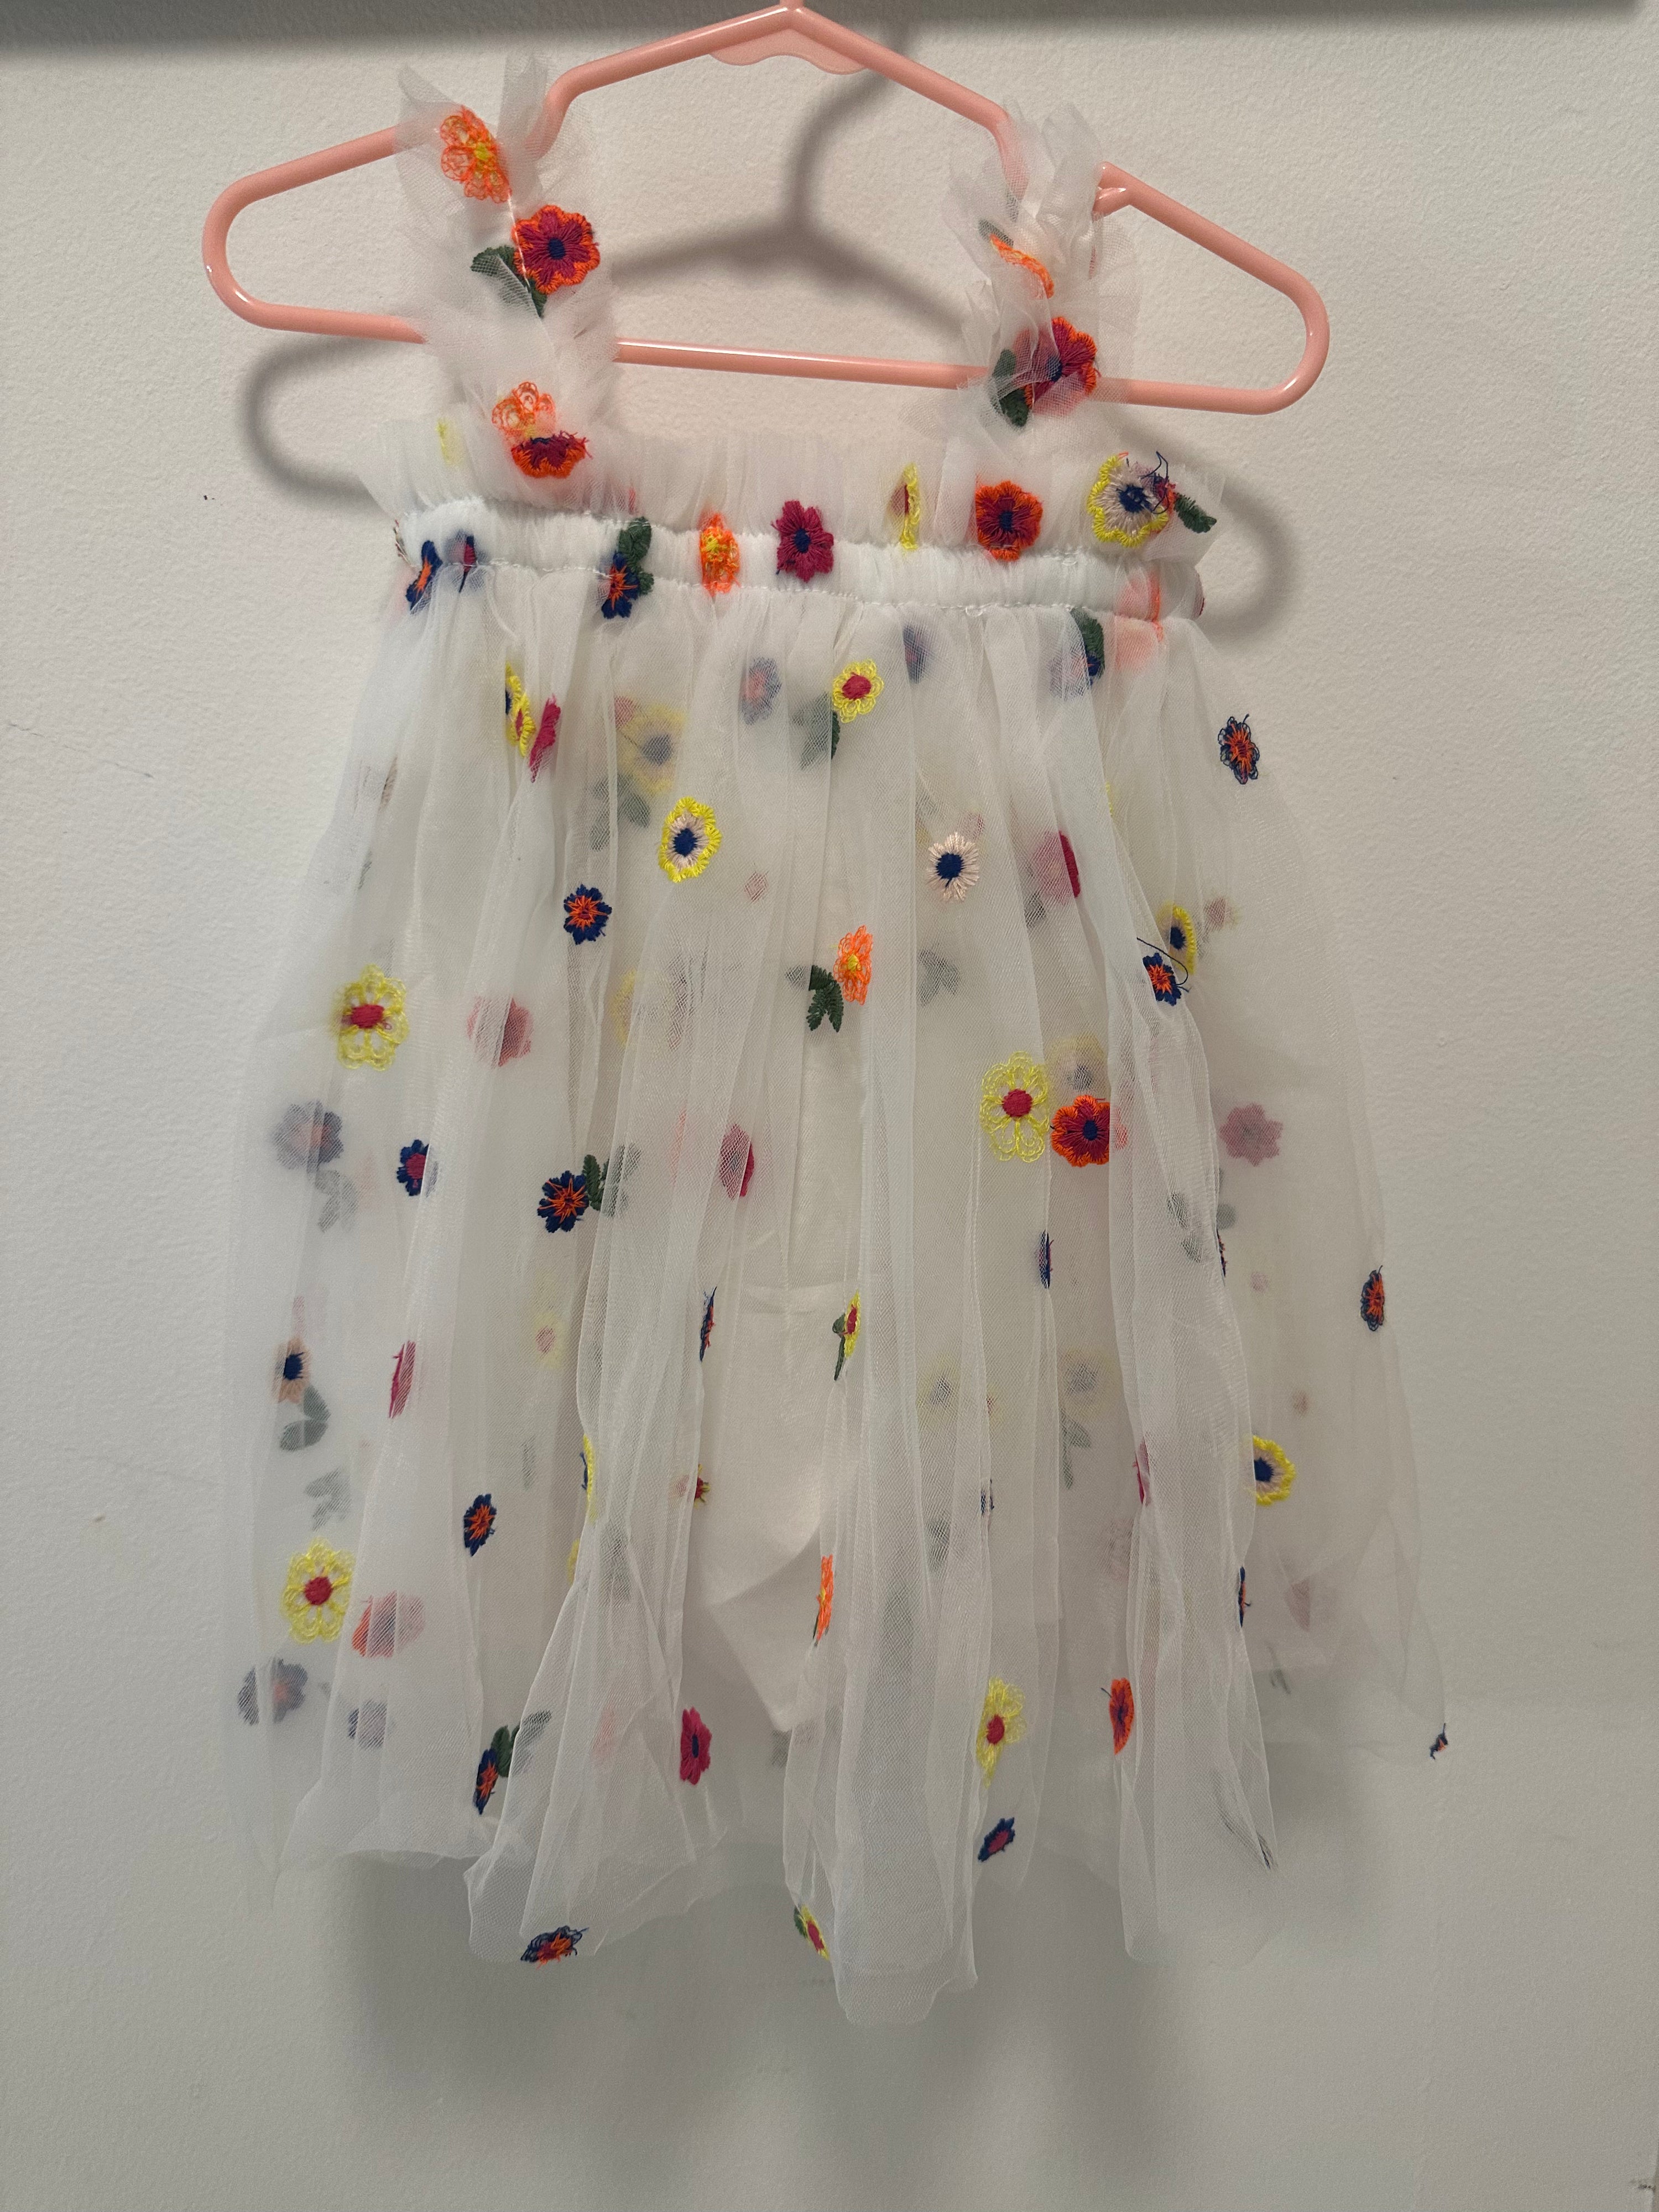 White Tulle Dress with Embroided Colorful Flowers